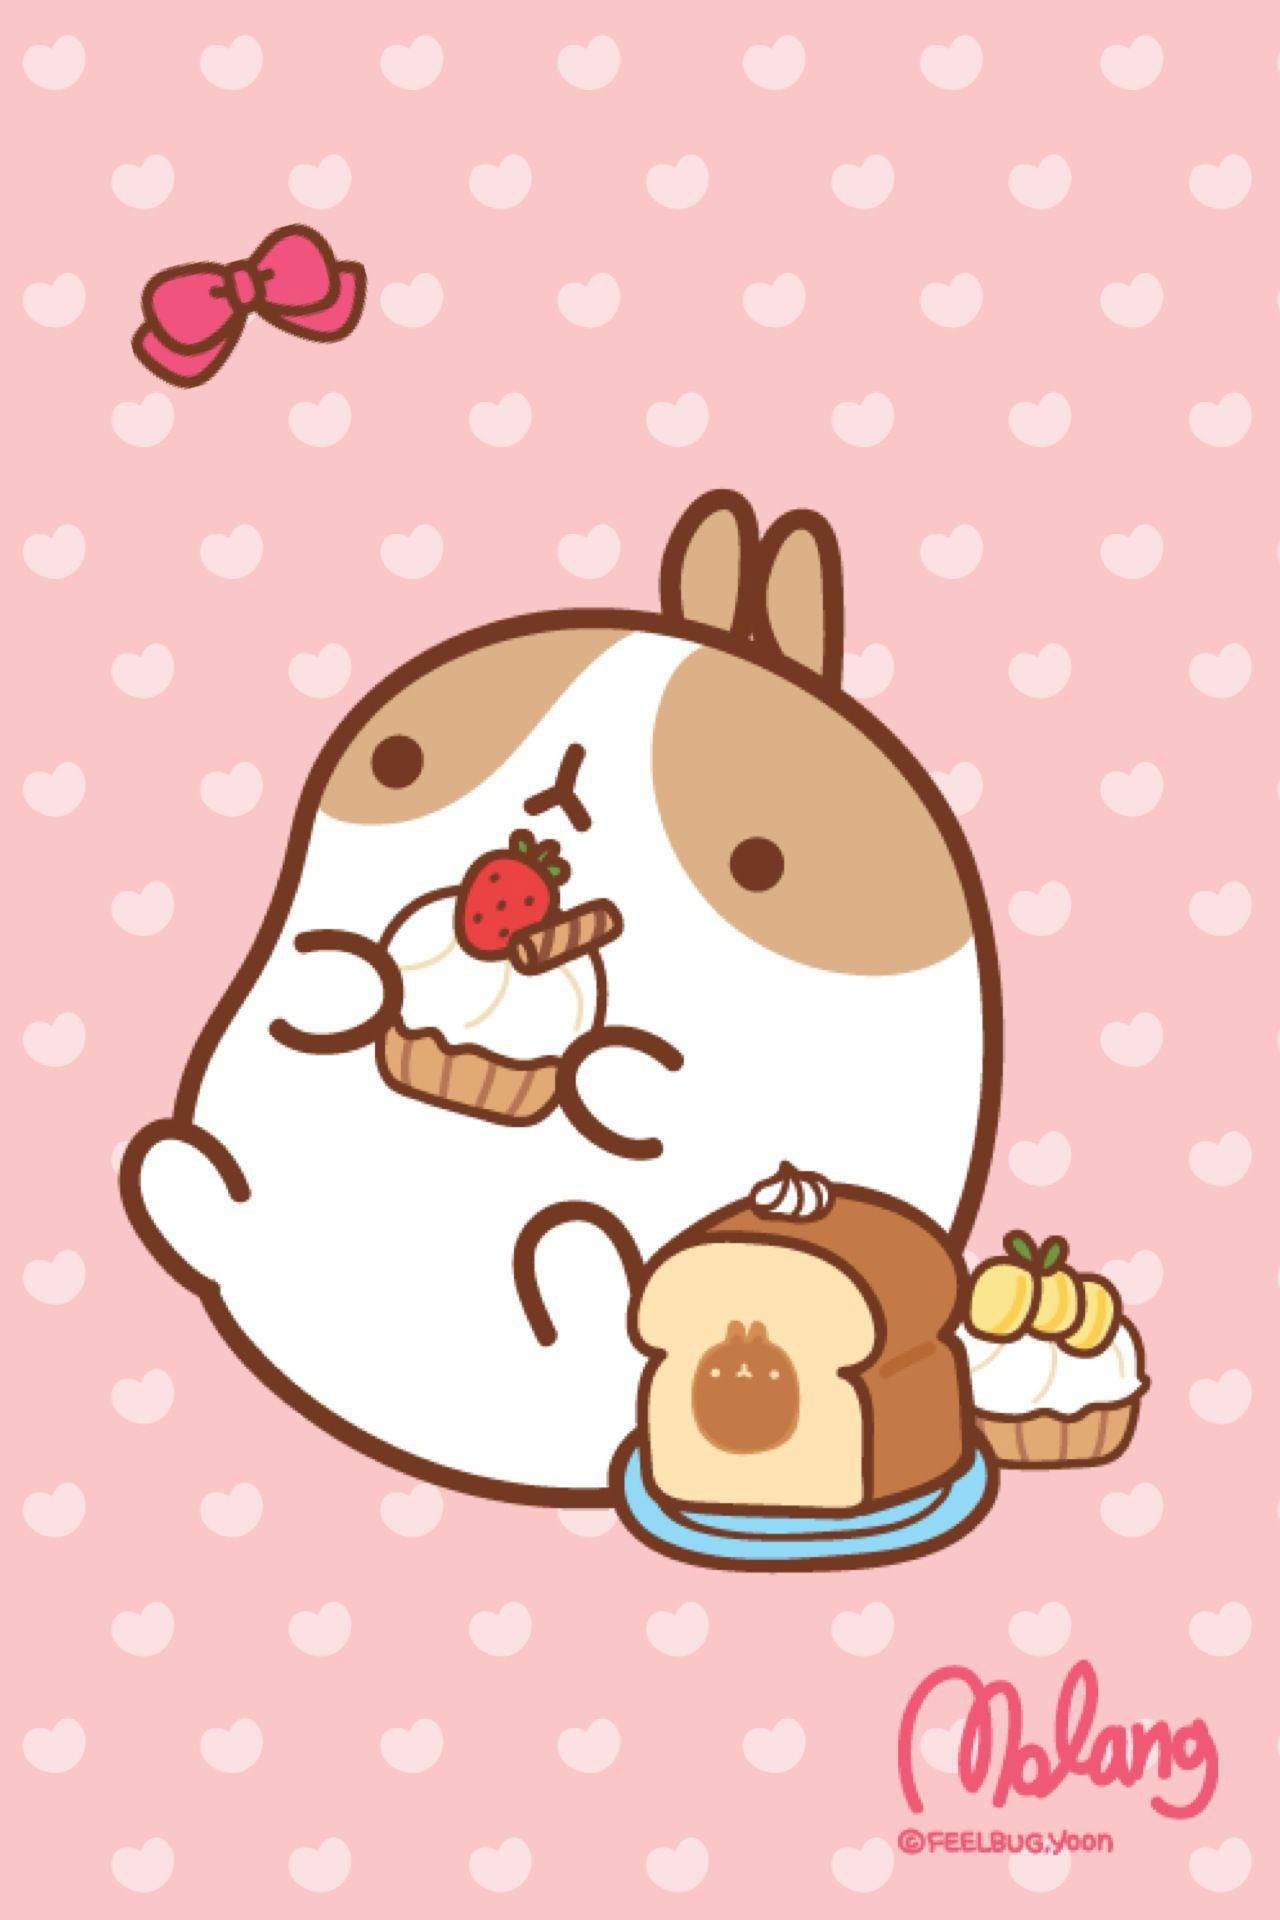 Cute illustration of a brown and white puppy dog eating a plate of food on a pink background - Molang